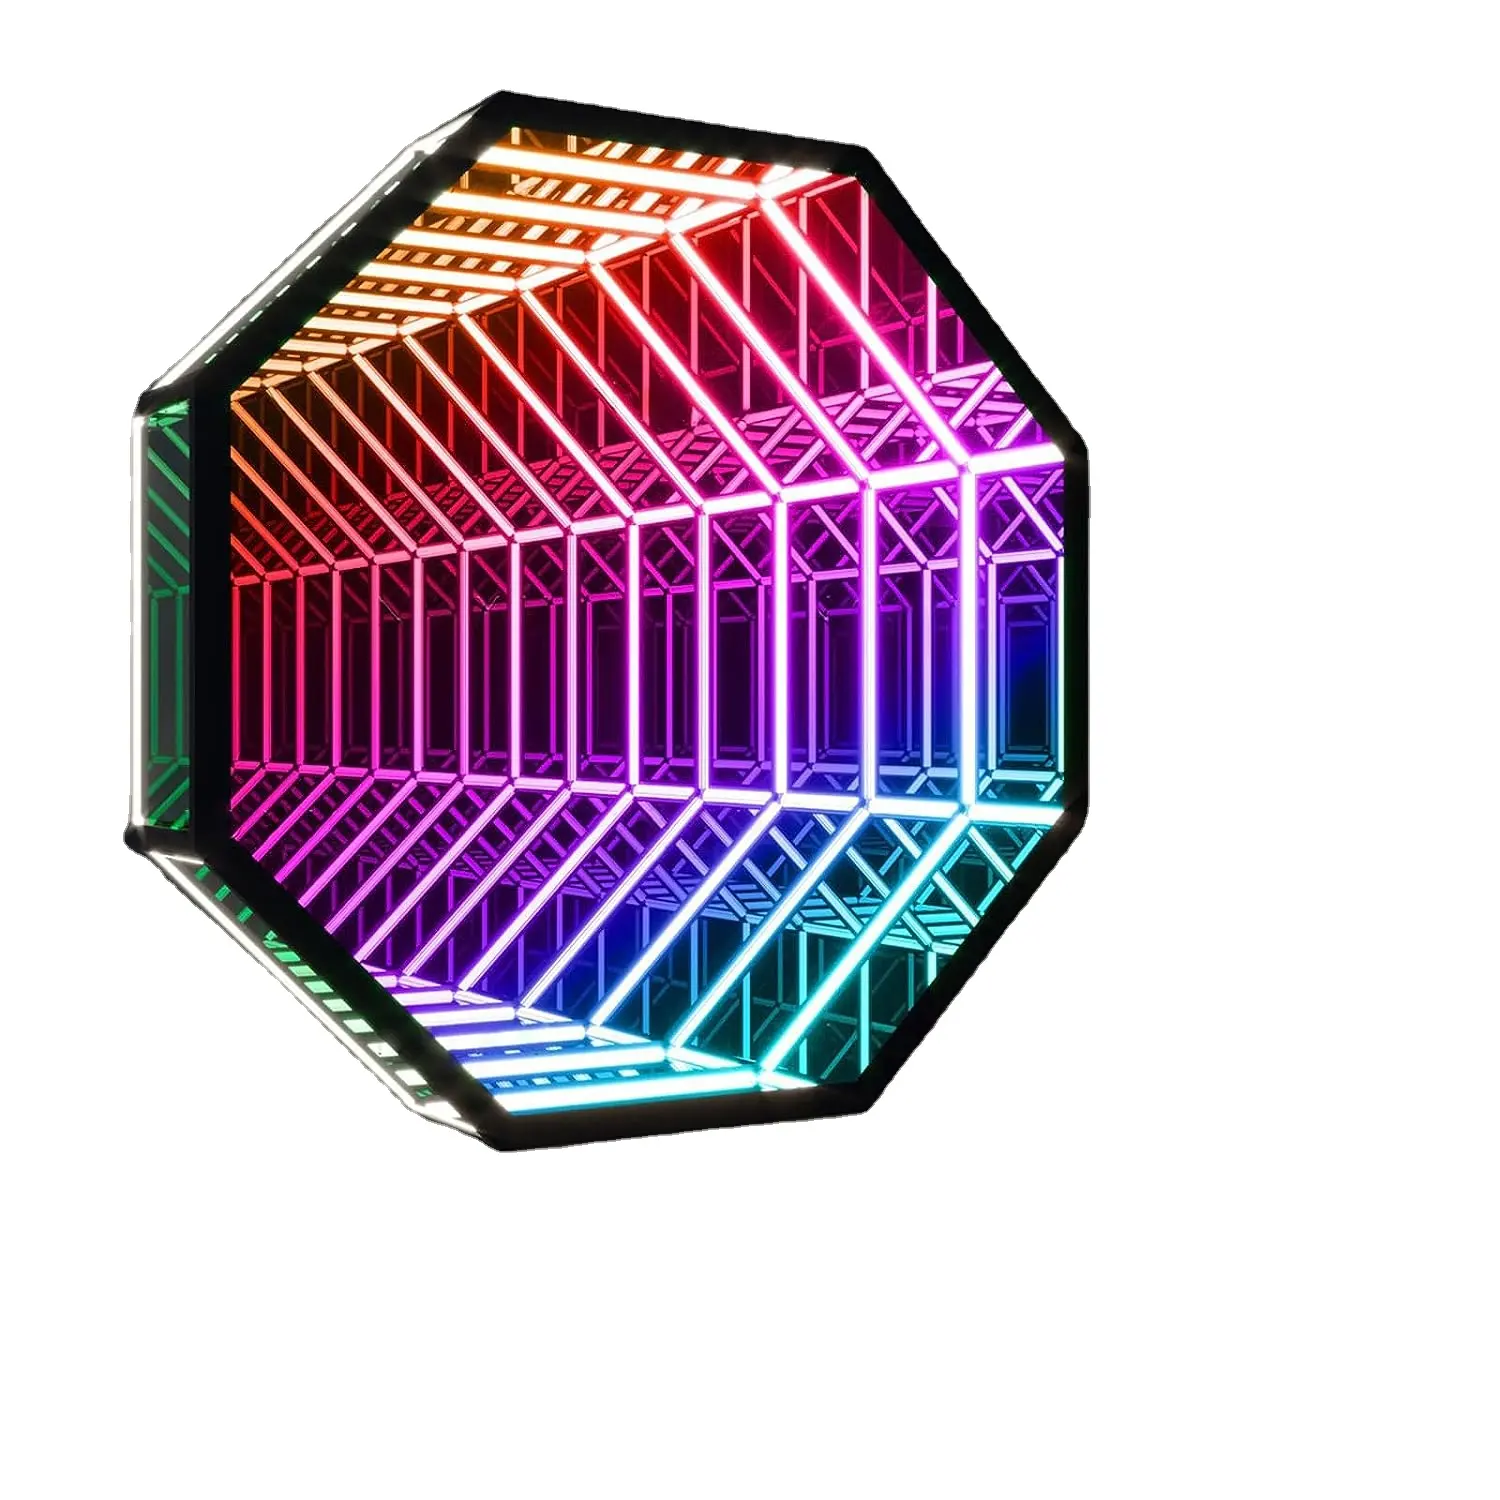 Tunnel light LED infinite mirror light with remote control 3D octagonal infinite wall mirror multi-color changing light